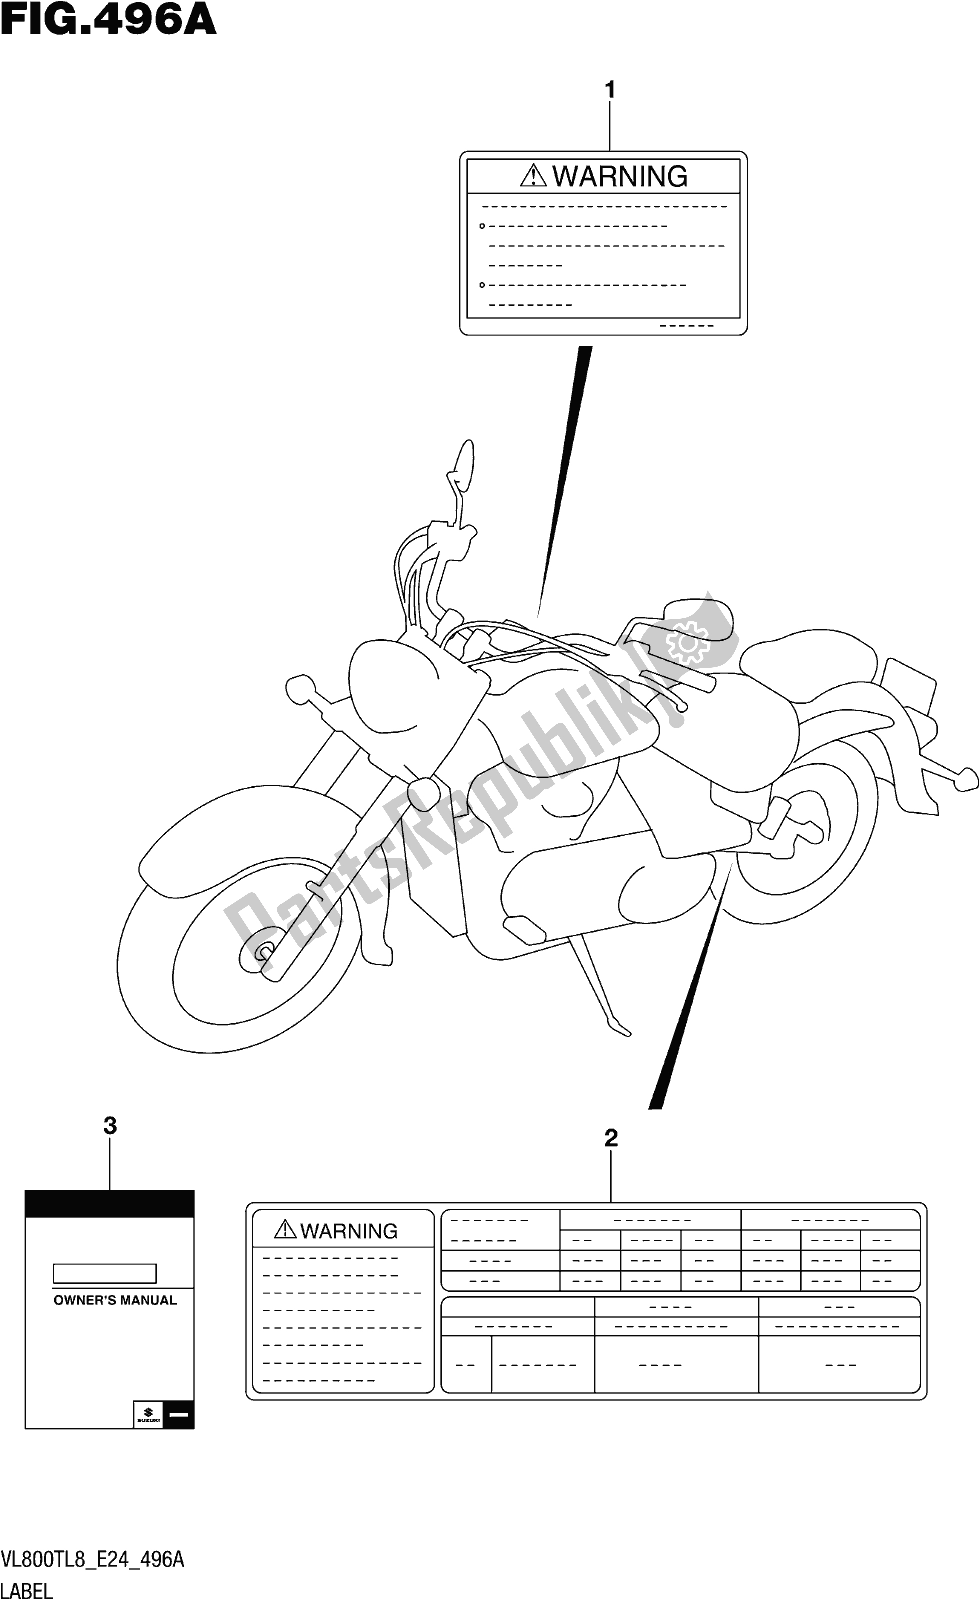 All parts for the Fig. 496a Label of the Suzuki VL 800T 2018